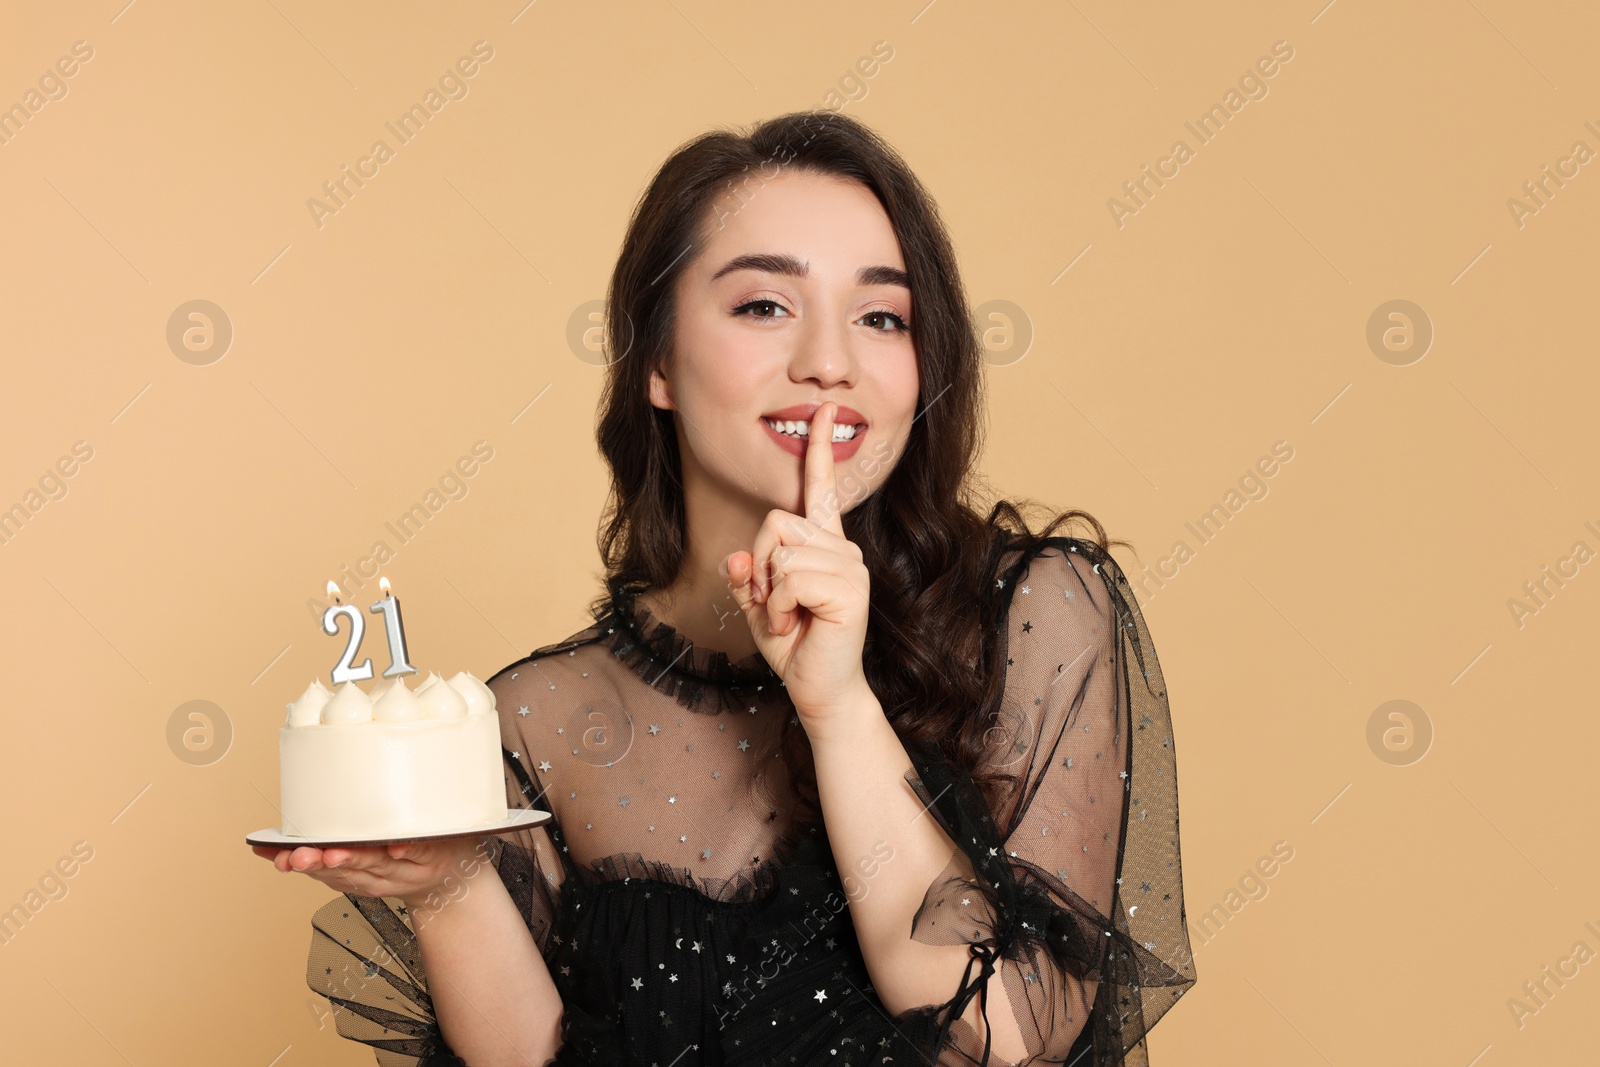 Photo of Coming of age party - 21st birthday. Smiling woman showing silence gesture and holding delicious cake with number shaped candles on beige background